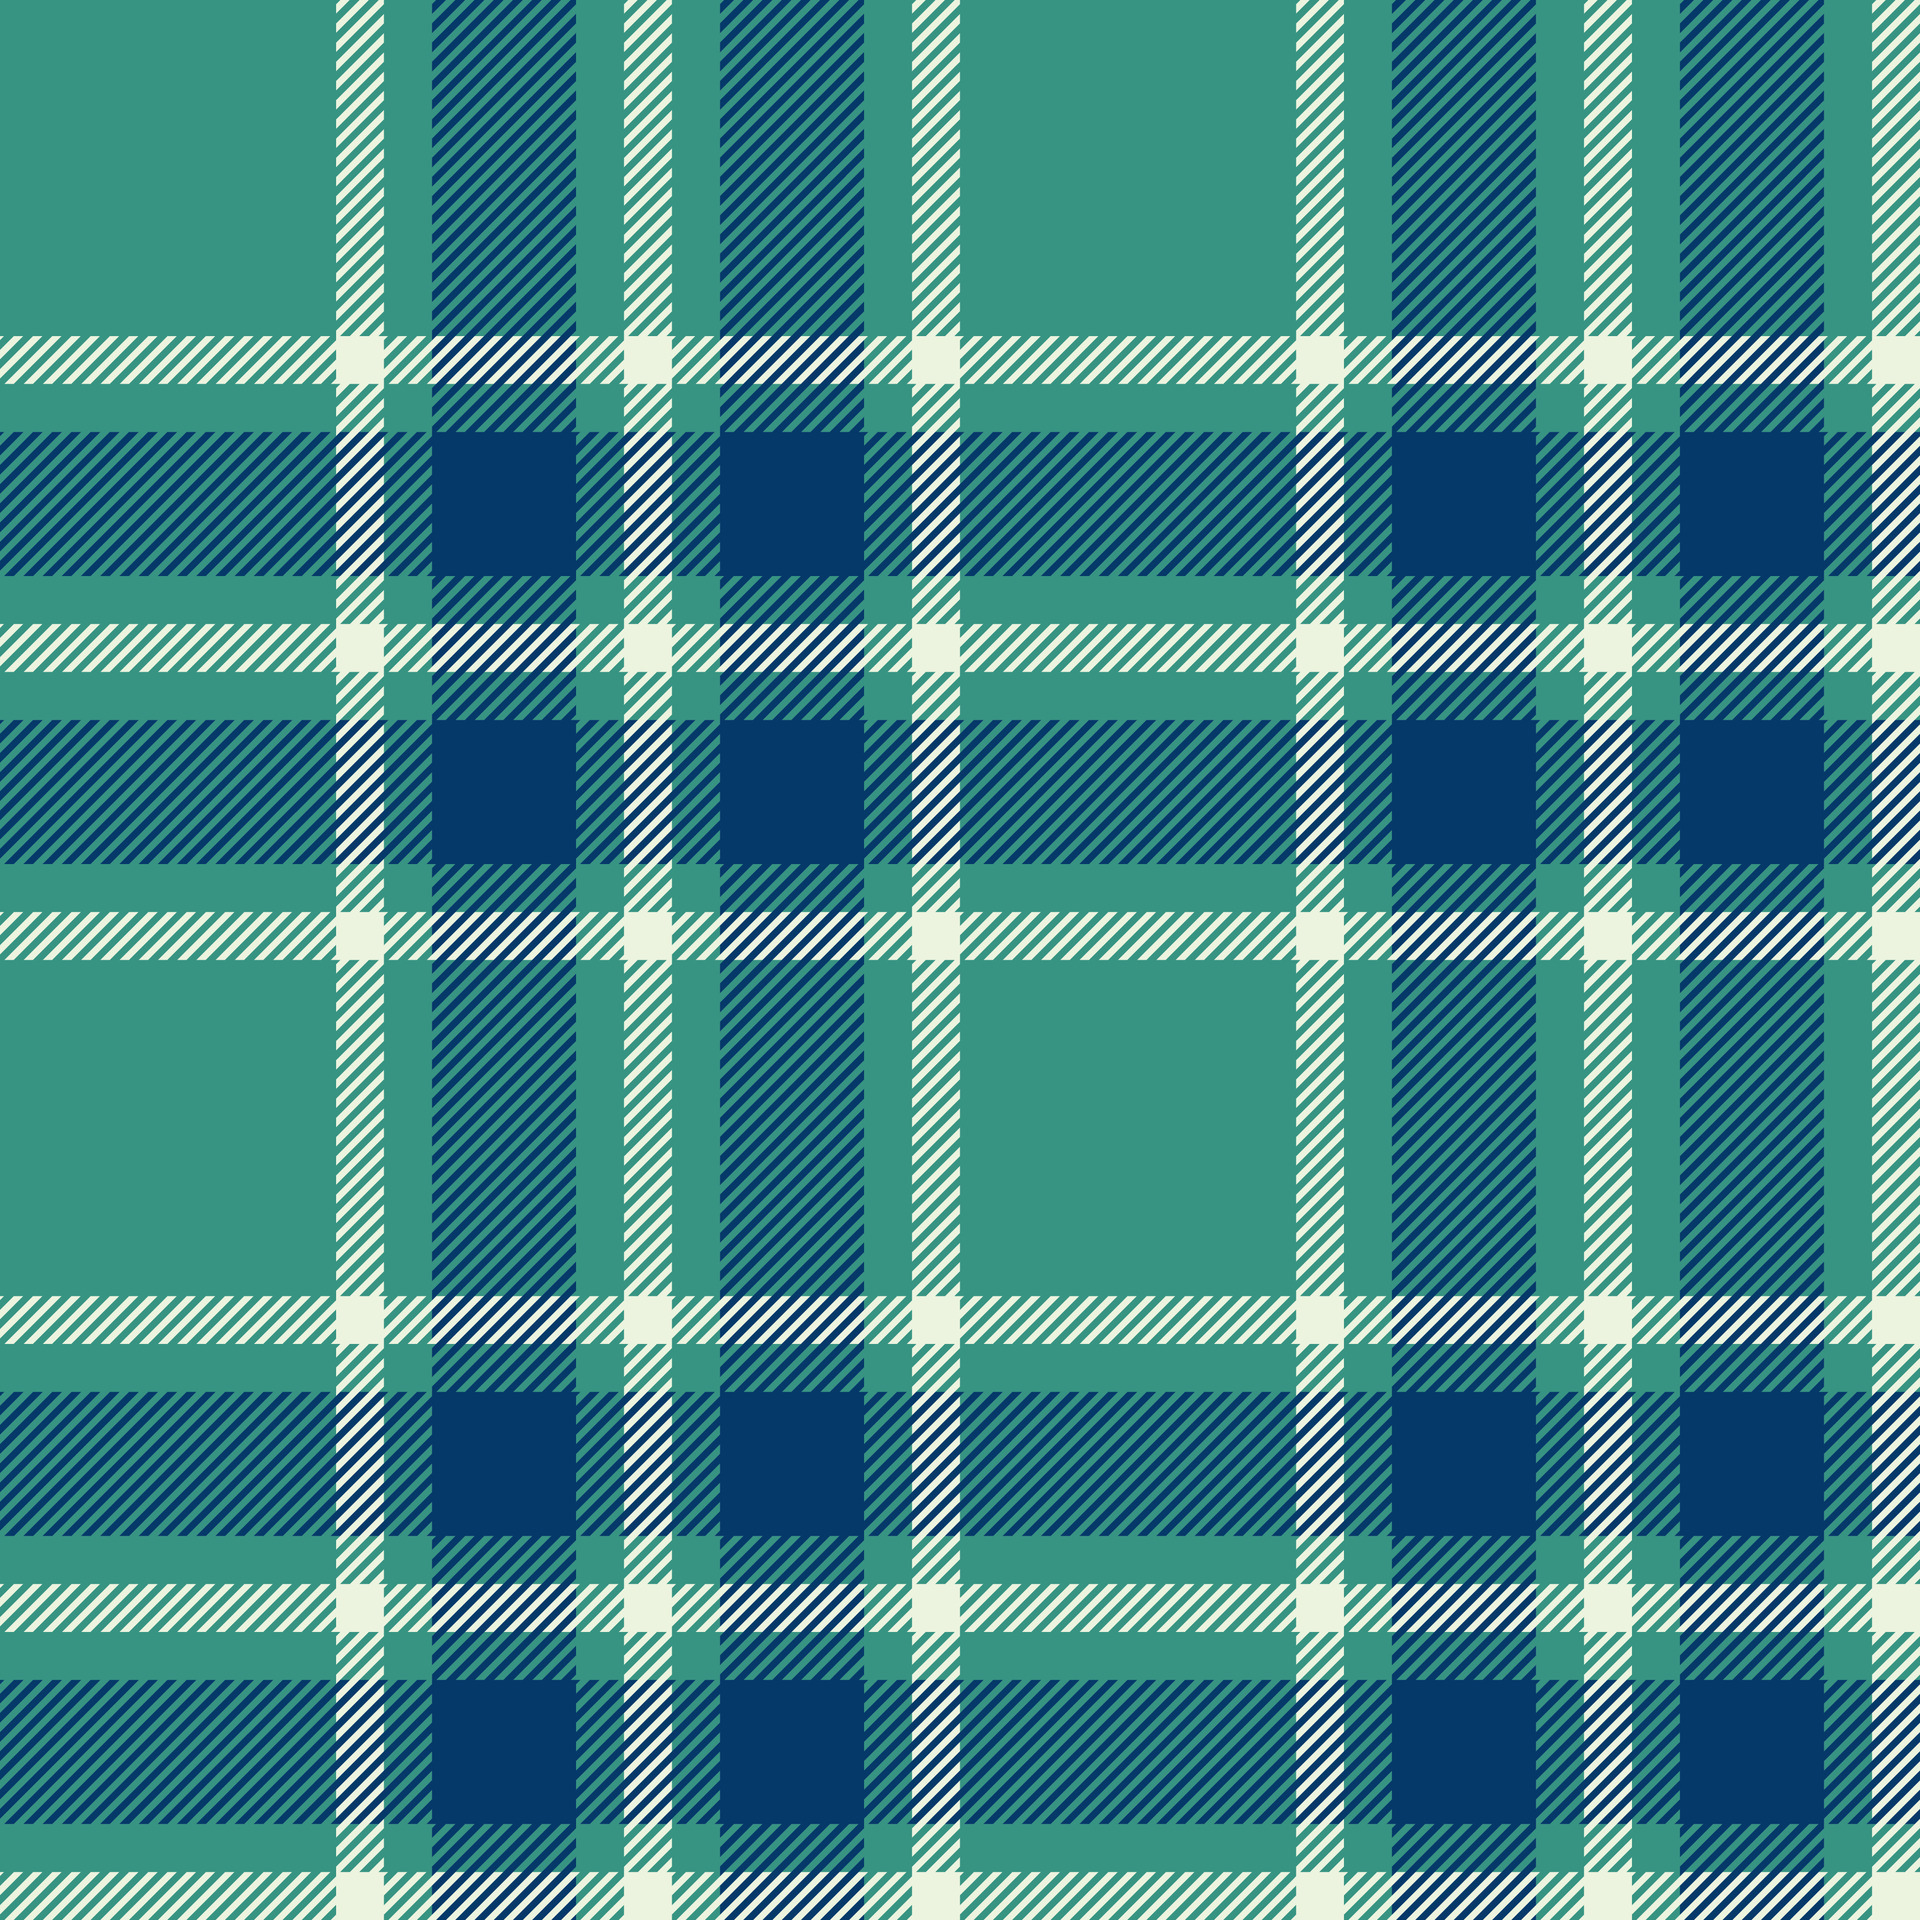 Plaid seamless pattern in blue. Check fabric texture. Vector textile ...